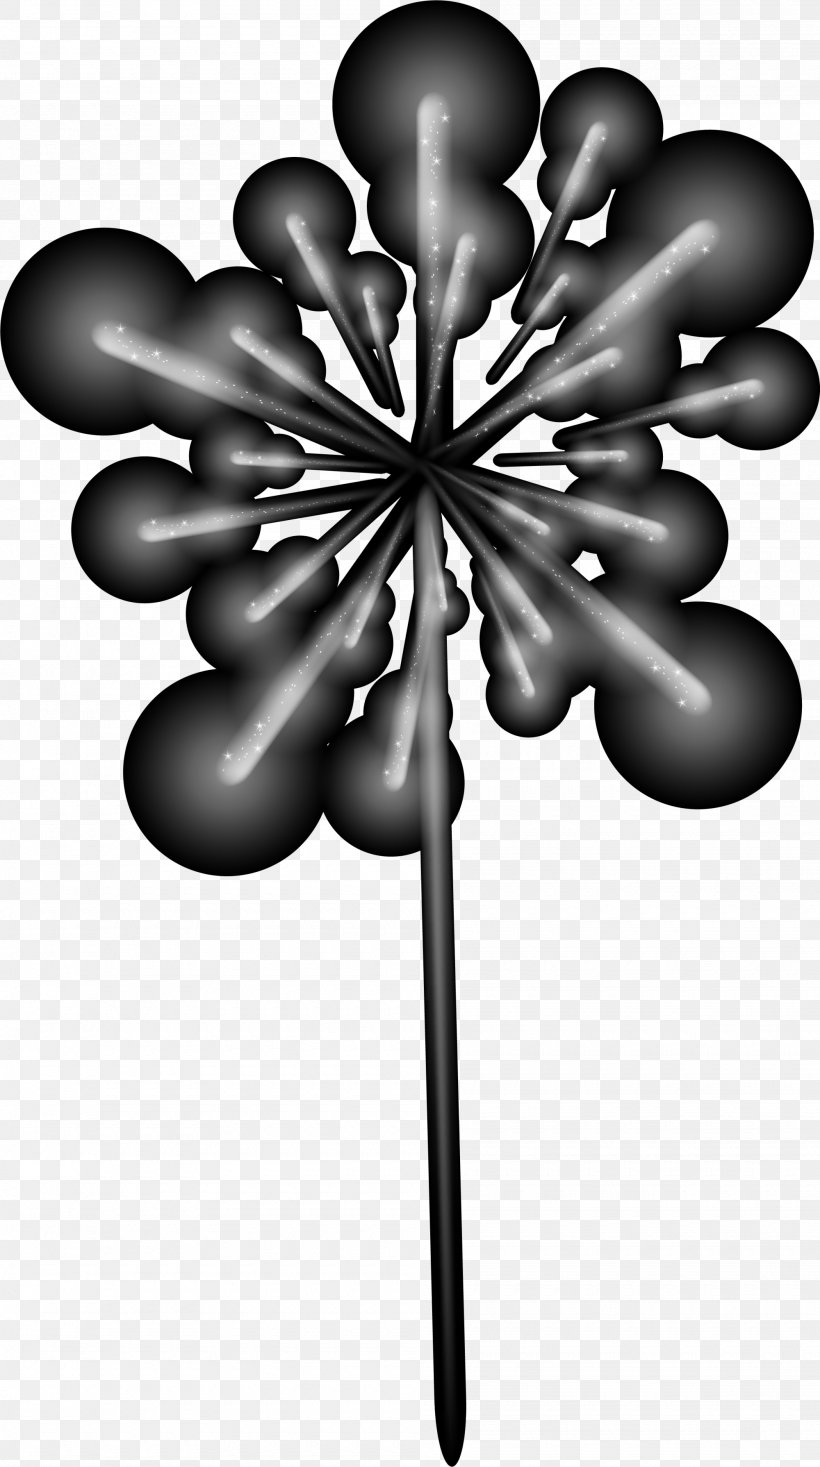 Black And White Graphic Design Fireworks, PNG, 2000x3580px, Black And White, Black, Designer, Fireworks, Flora Download Free